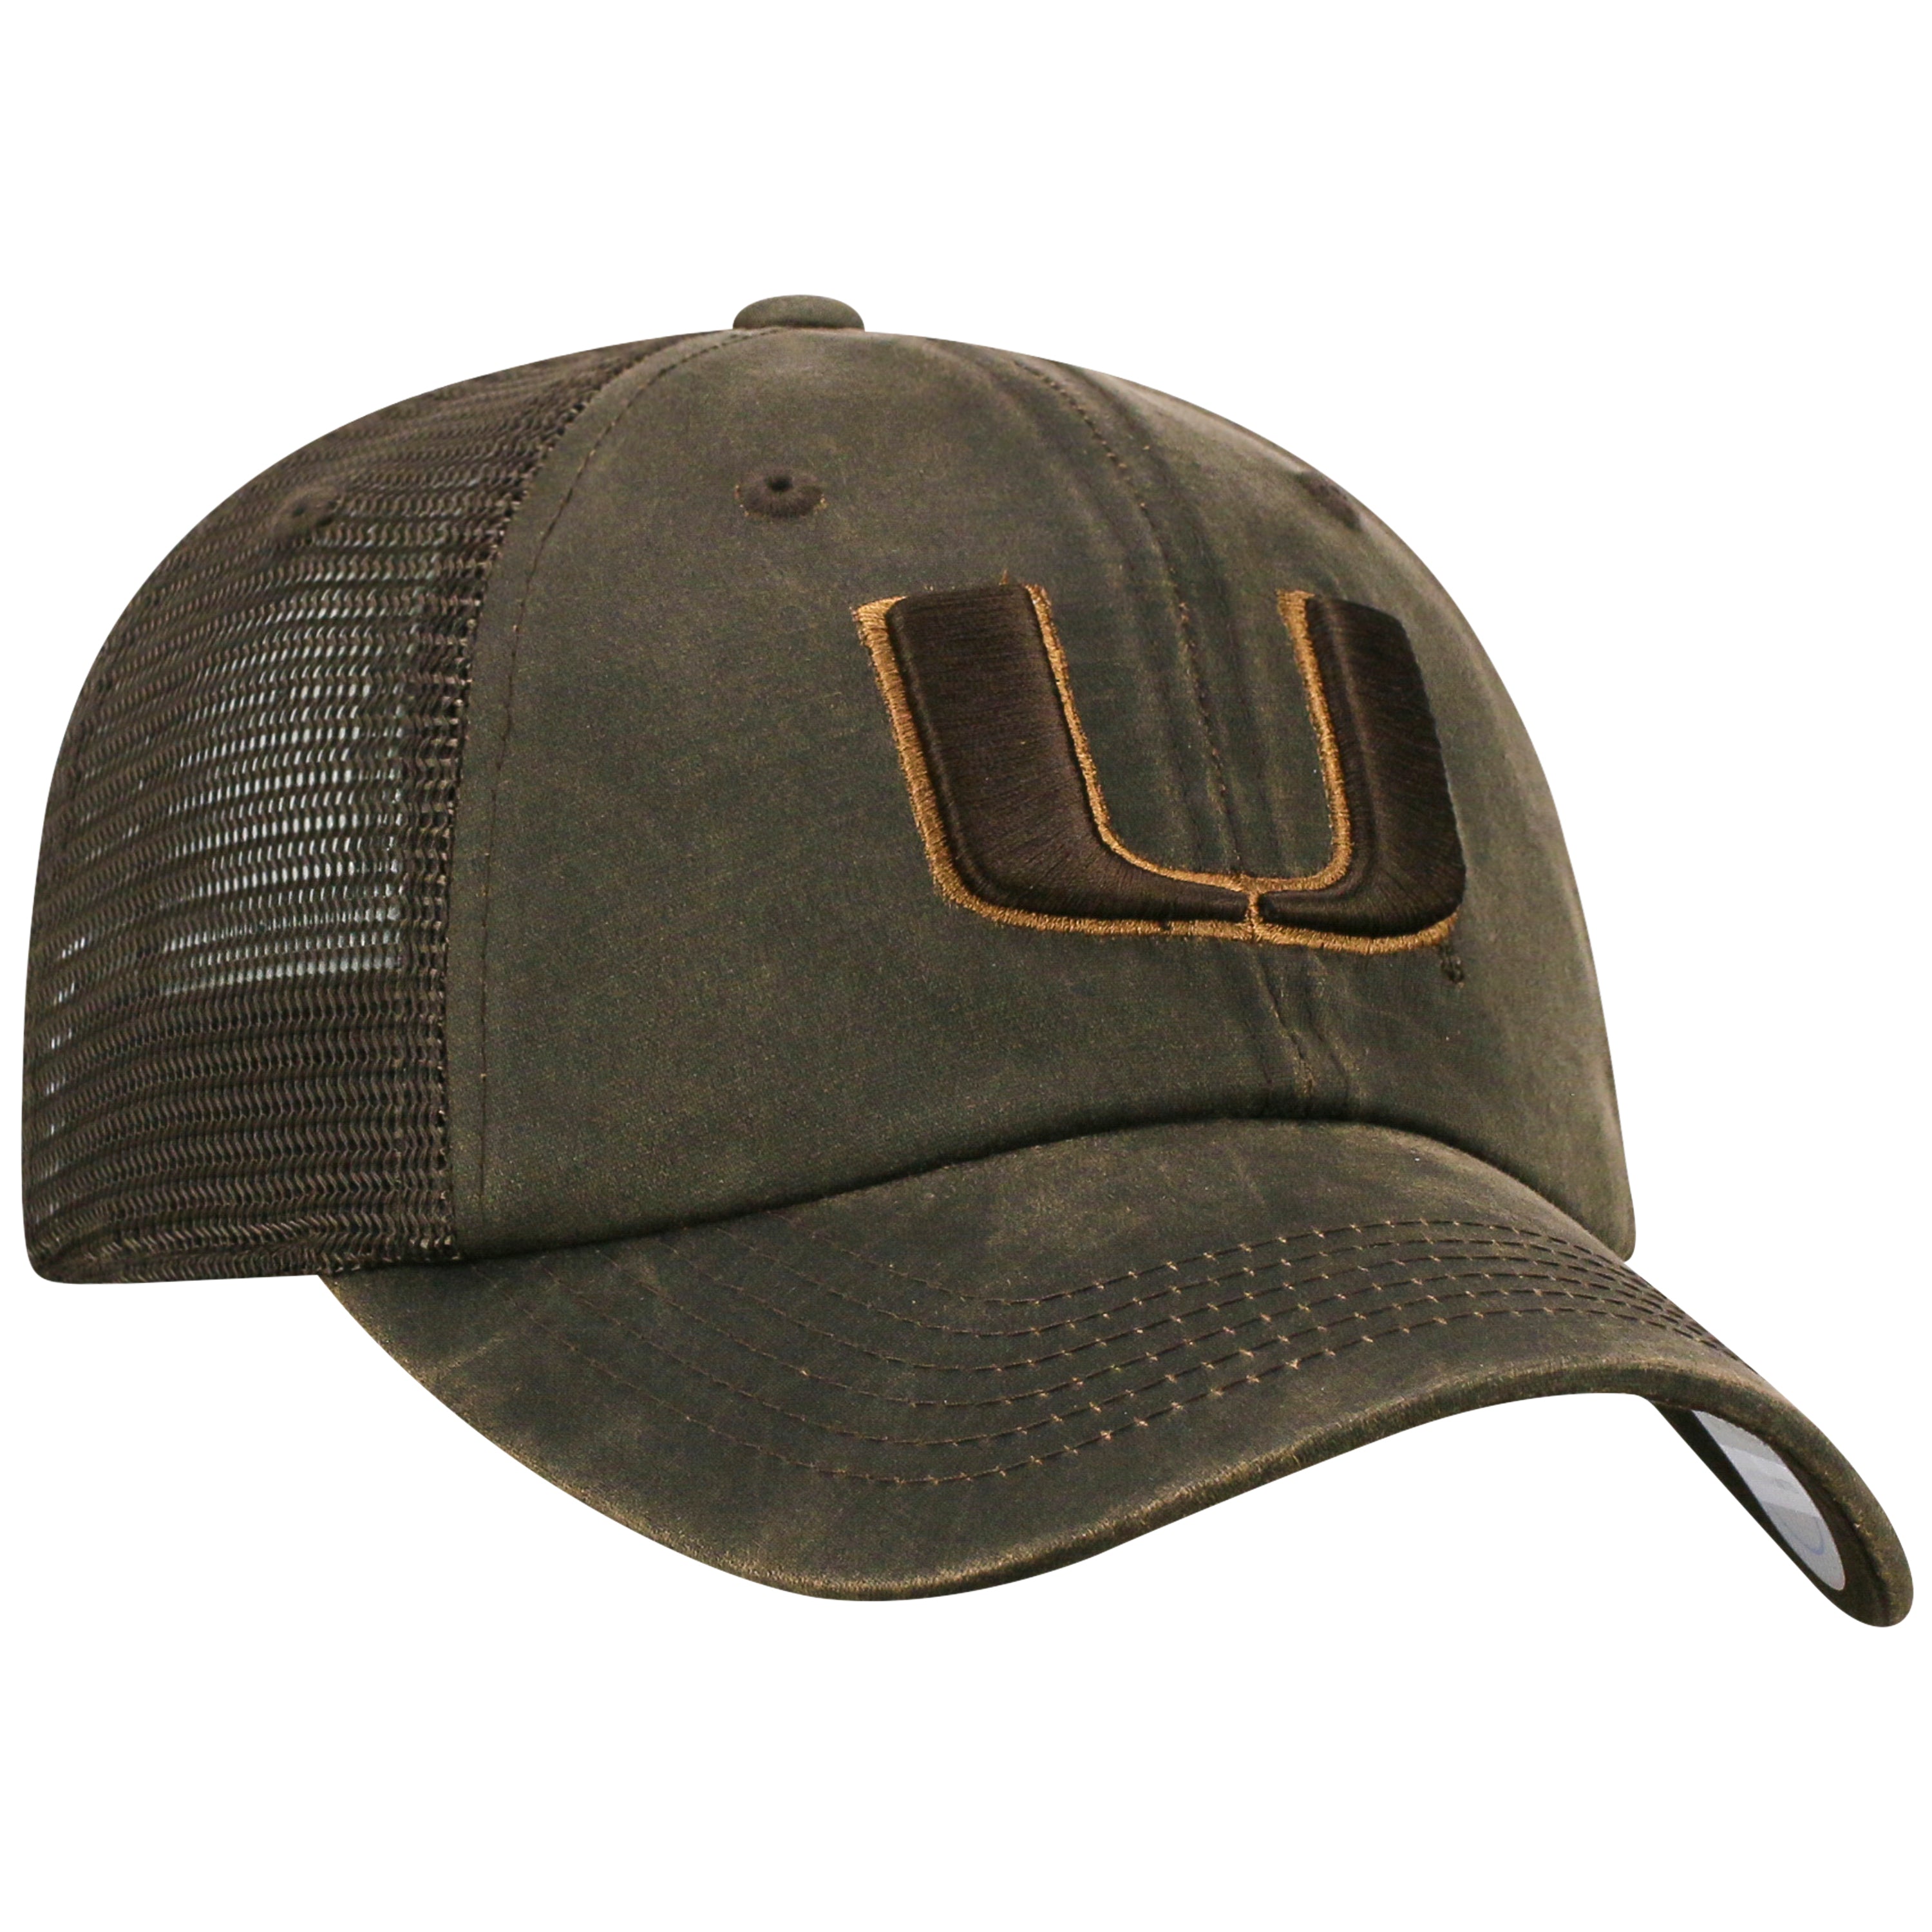 Miami Hurricanes Top of the World 2018 Chestnut Snapback Brown